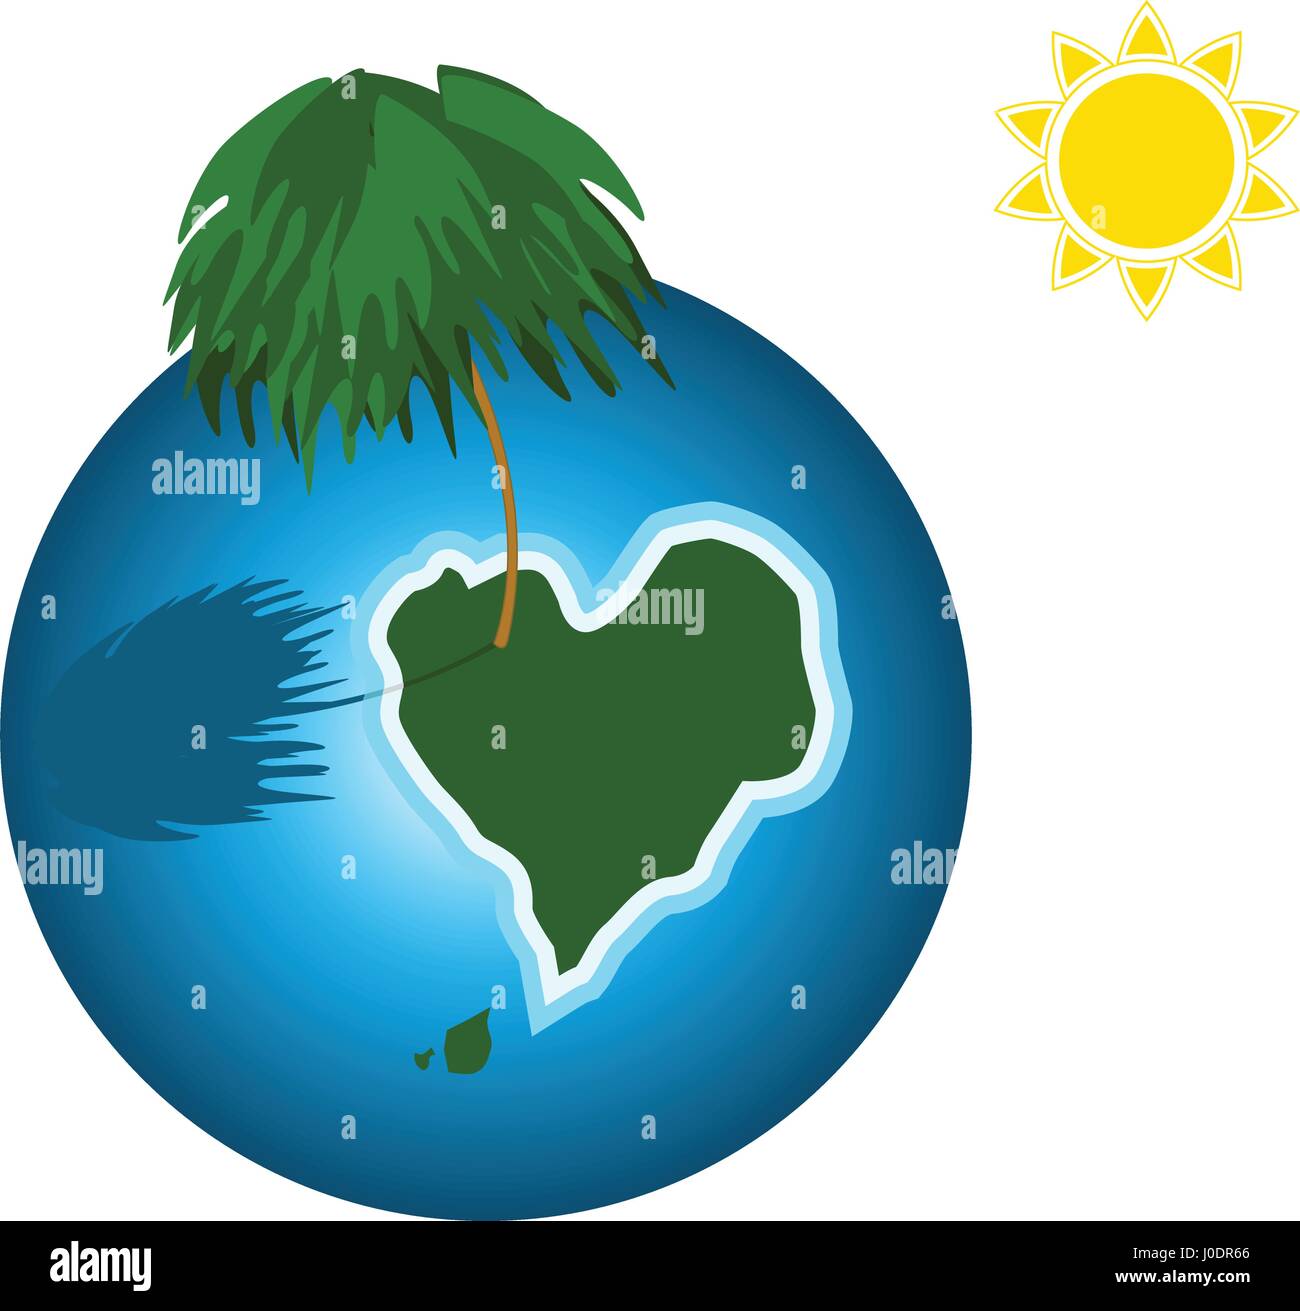 Love island on the earth. Earth day concept Stock Vector